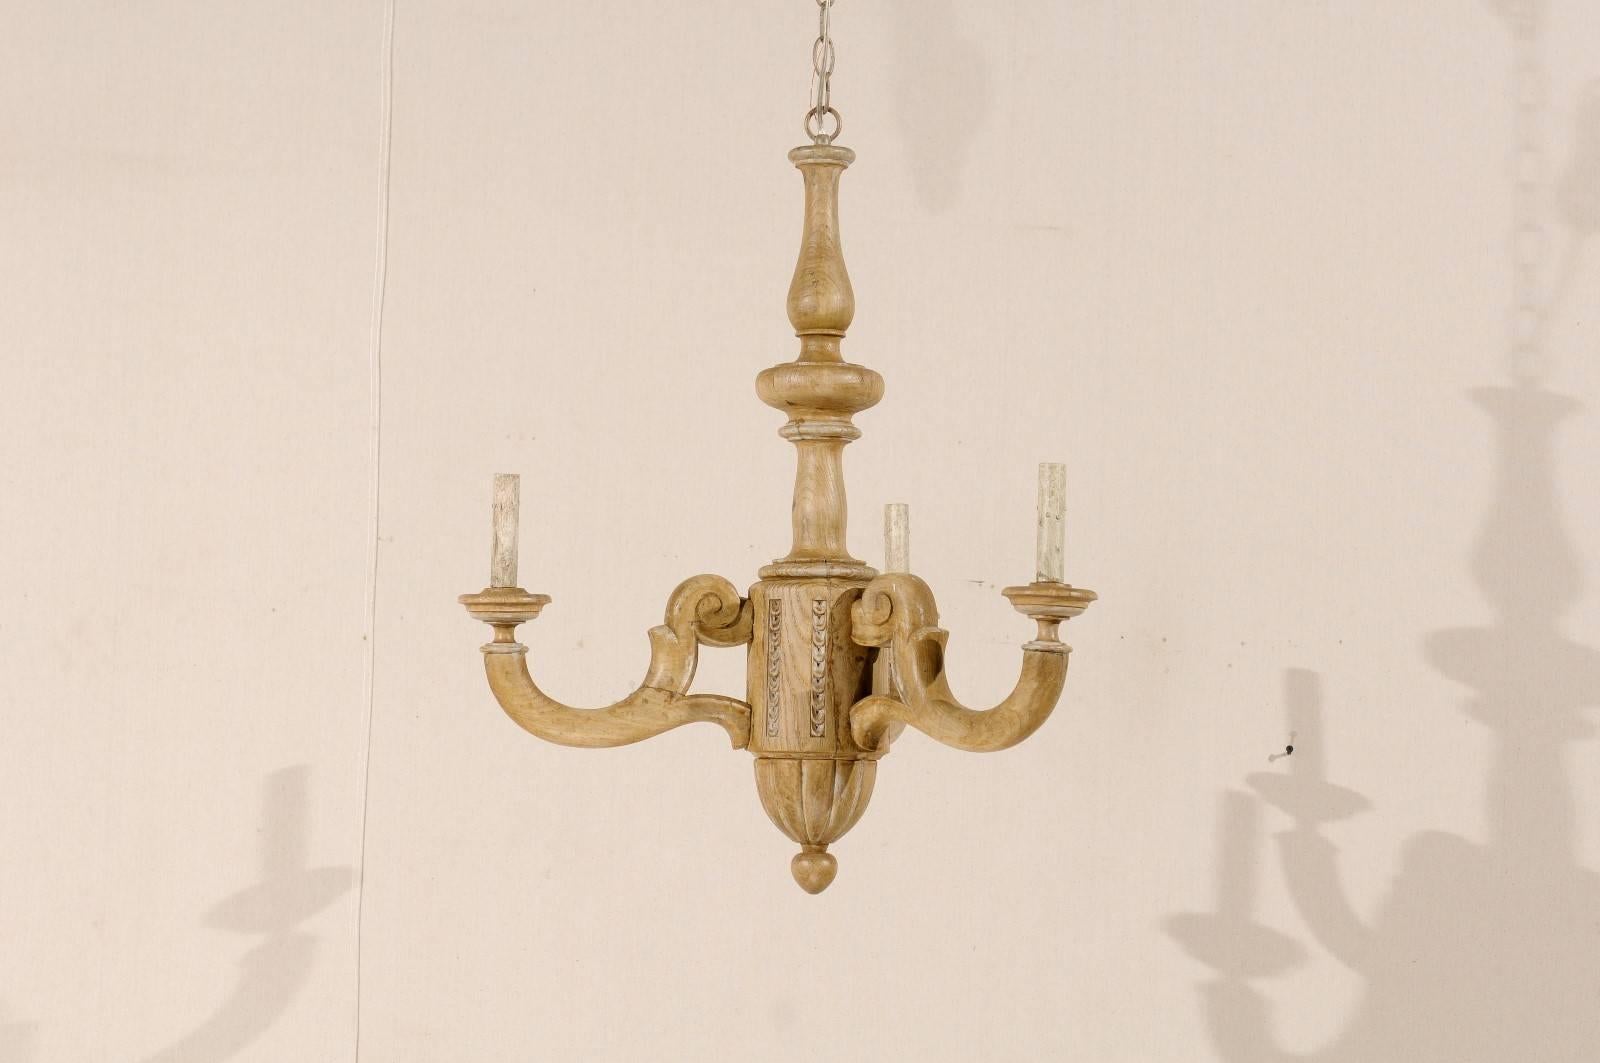 A French three-light carved wood chandelier. This French chandelier from the mid-20th century has a natural wood finish and features a central column with three arms extending out from geometrical volutes into a soft swoop and up to the bobèches.